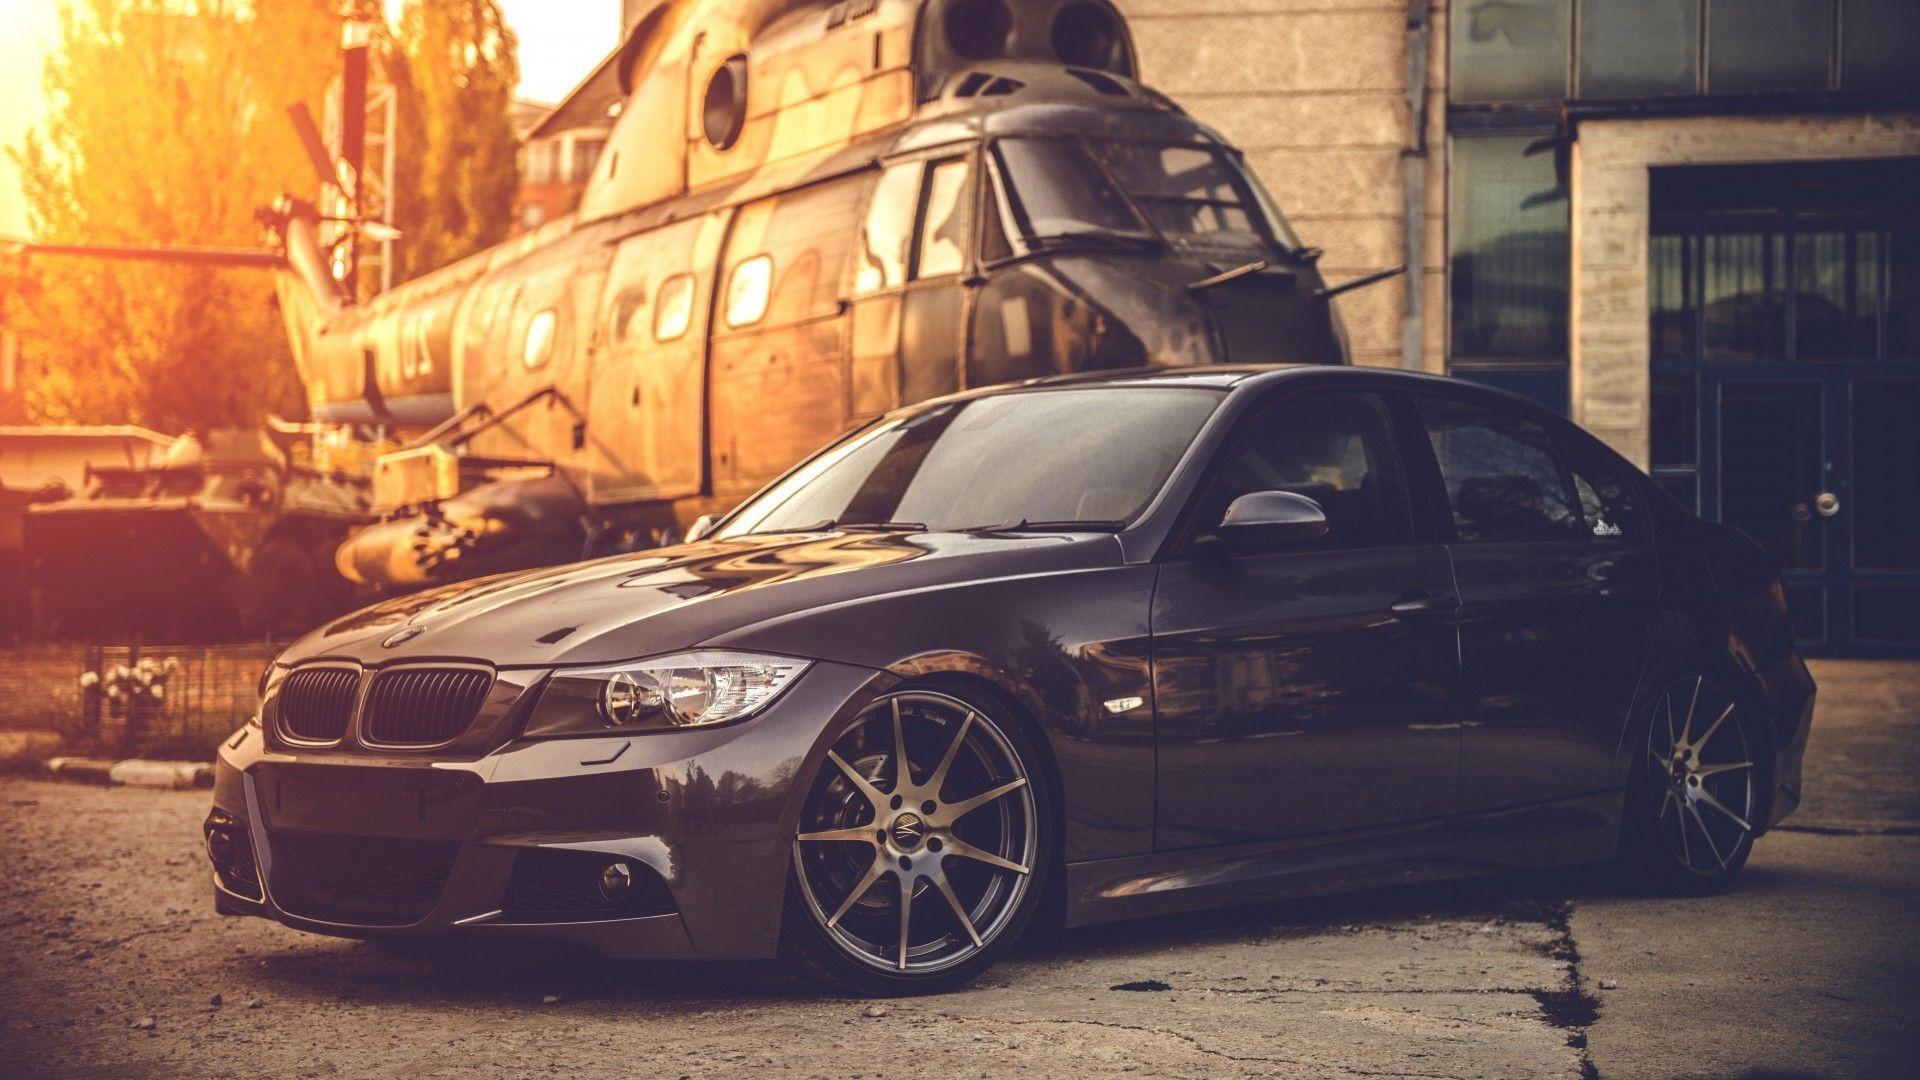 BMW Wallpapers 1920x1080 - Wallpaper Cave